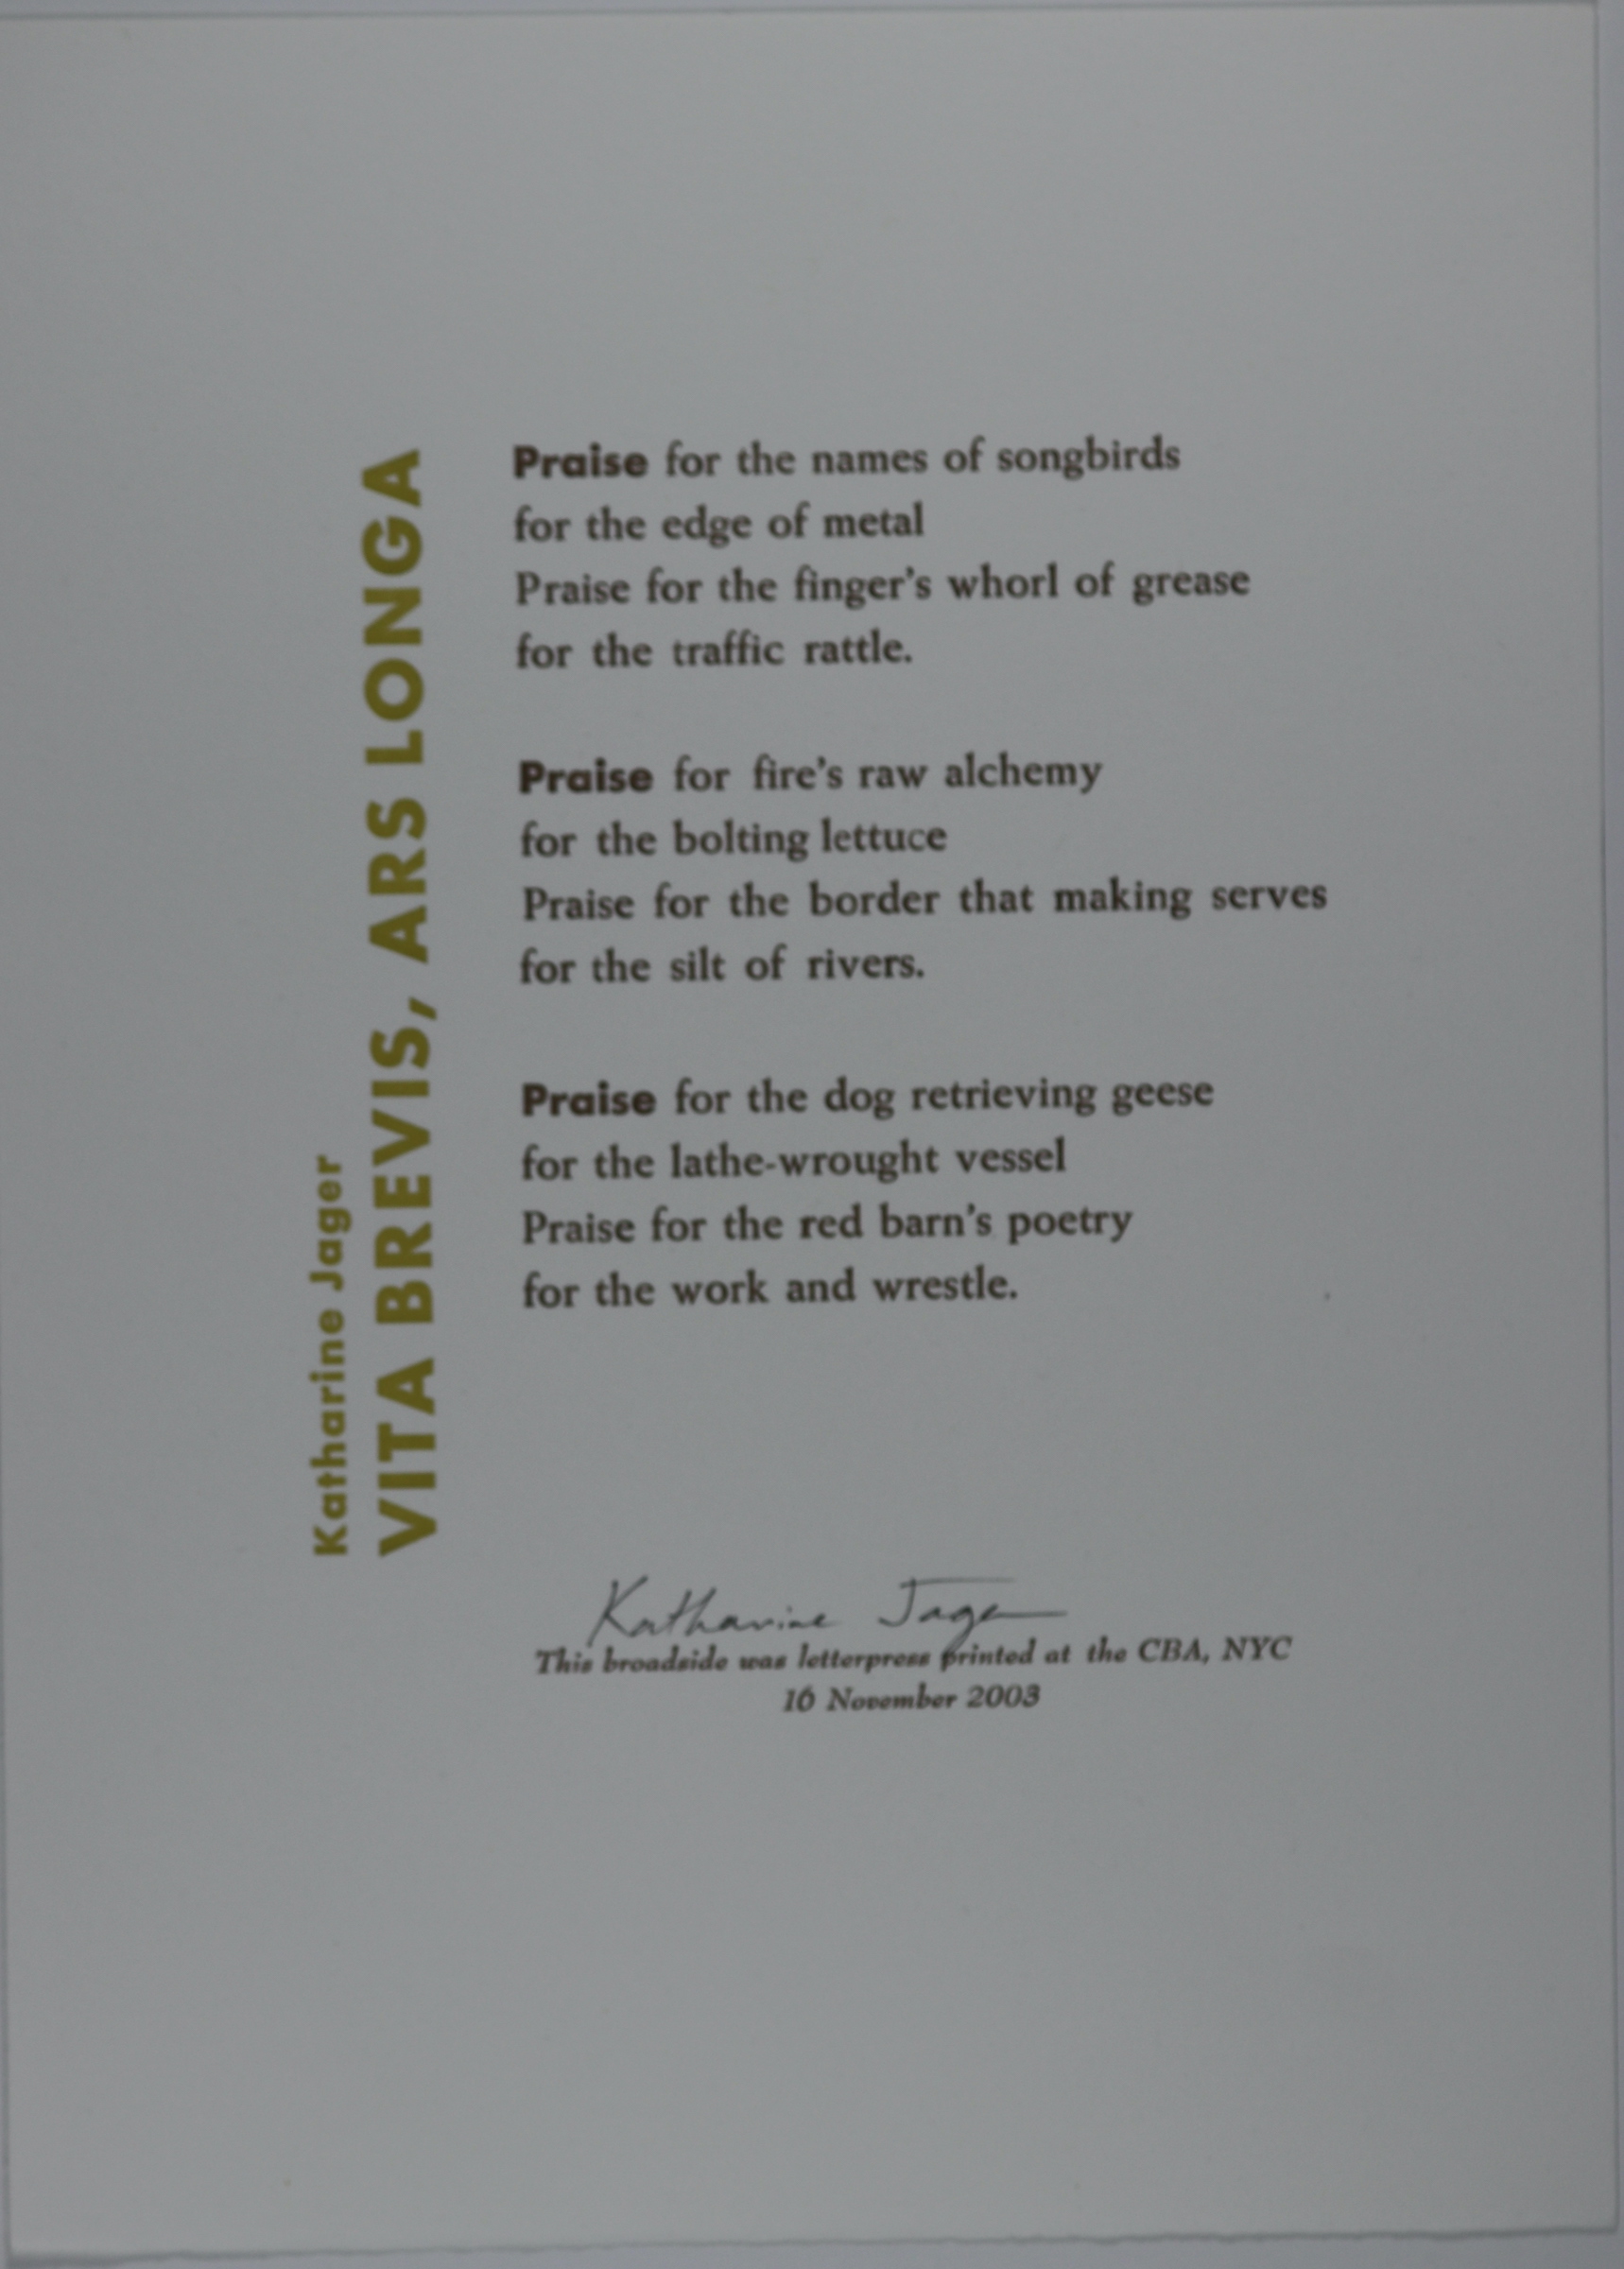 Broadside consists of a white background with the title in light green, written vertically to the left beside the text. The text is written in black lettering, each first word in bold. The text is formatted into three paragraphs, towards the center.